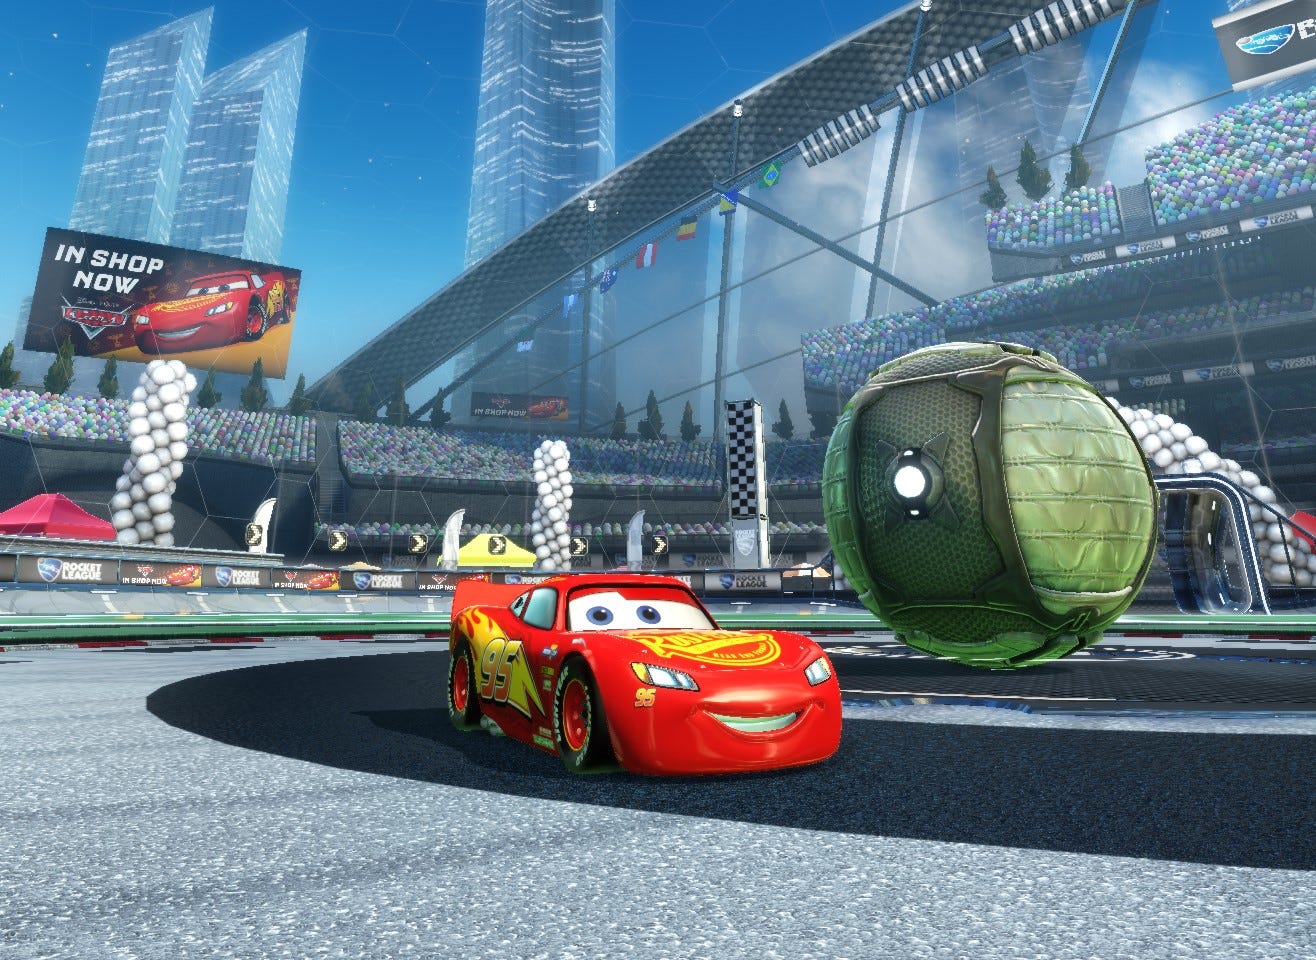 Lightning McQueen is Now Available in Rocket League - Insider Gaming